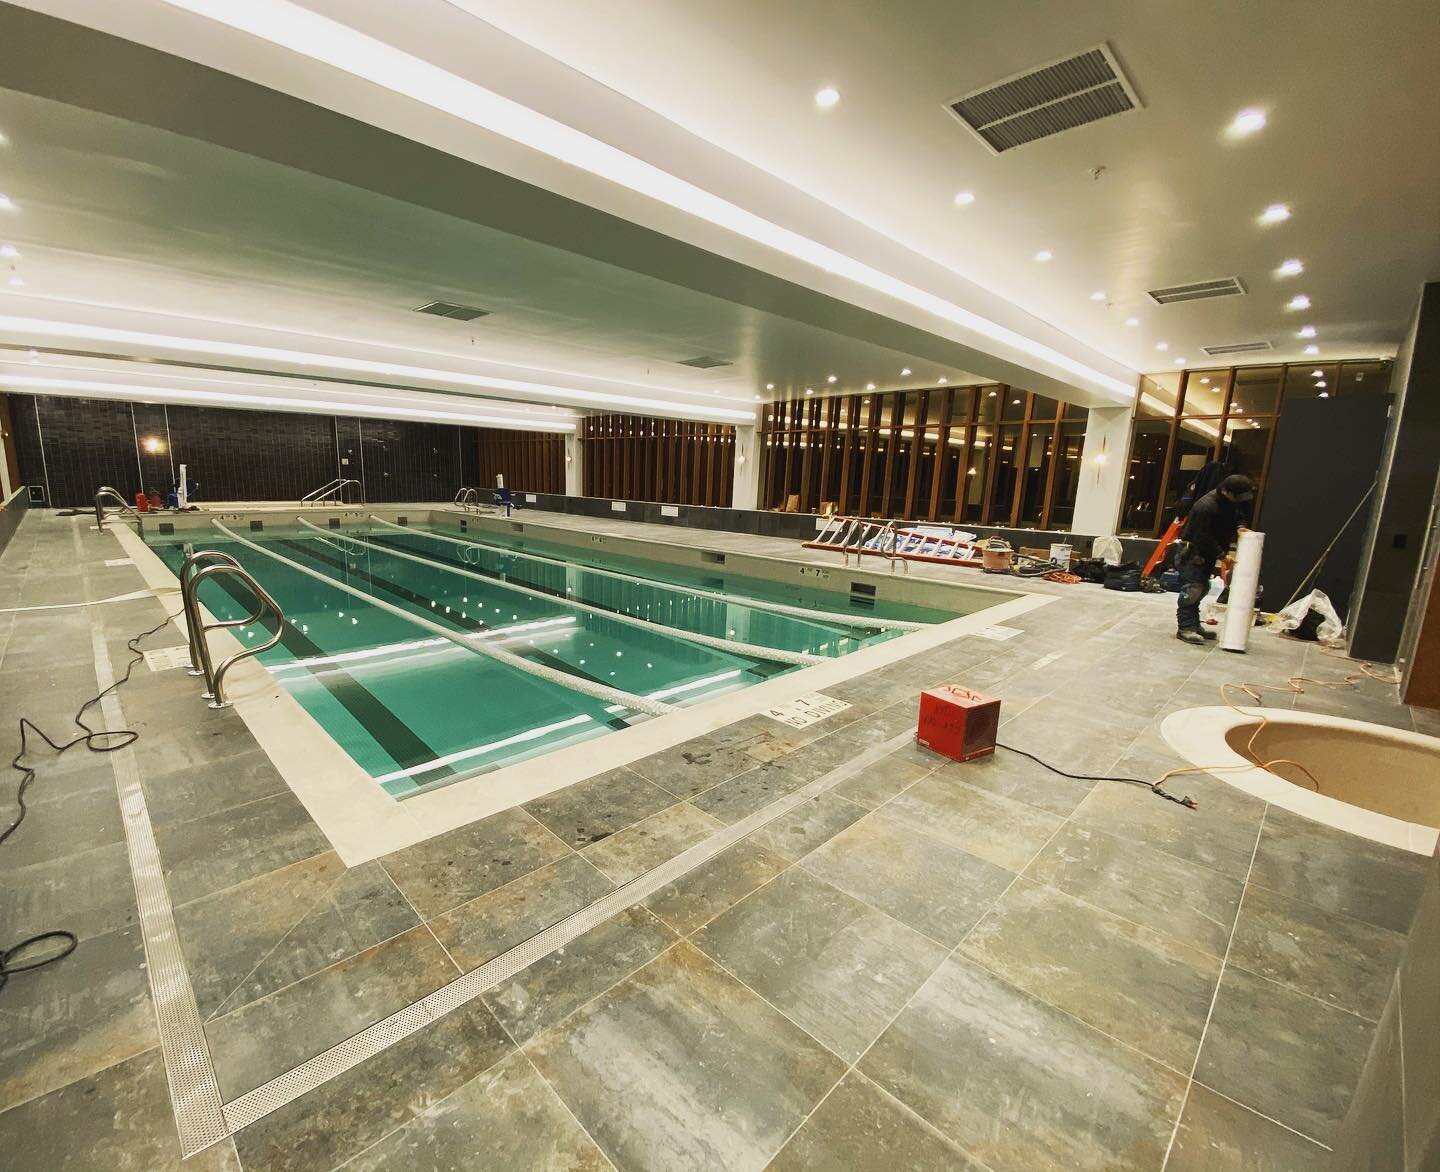 Finishing up this indoor Lap Pool, Spa and plunge pool in Queens NY. Almost ready to swim in.....
#swimming pool #swimmingpool #build #queens #ny #indoorfun #architecturedesign #nydevelopers #awesomeclient